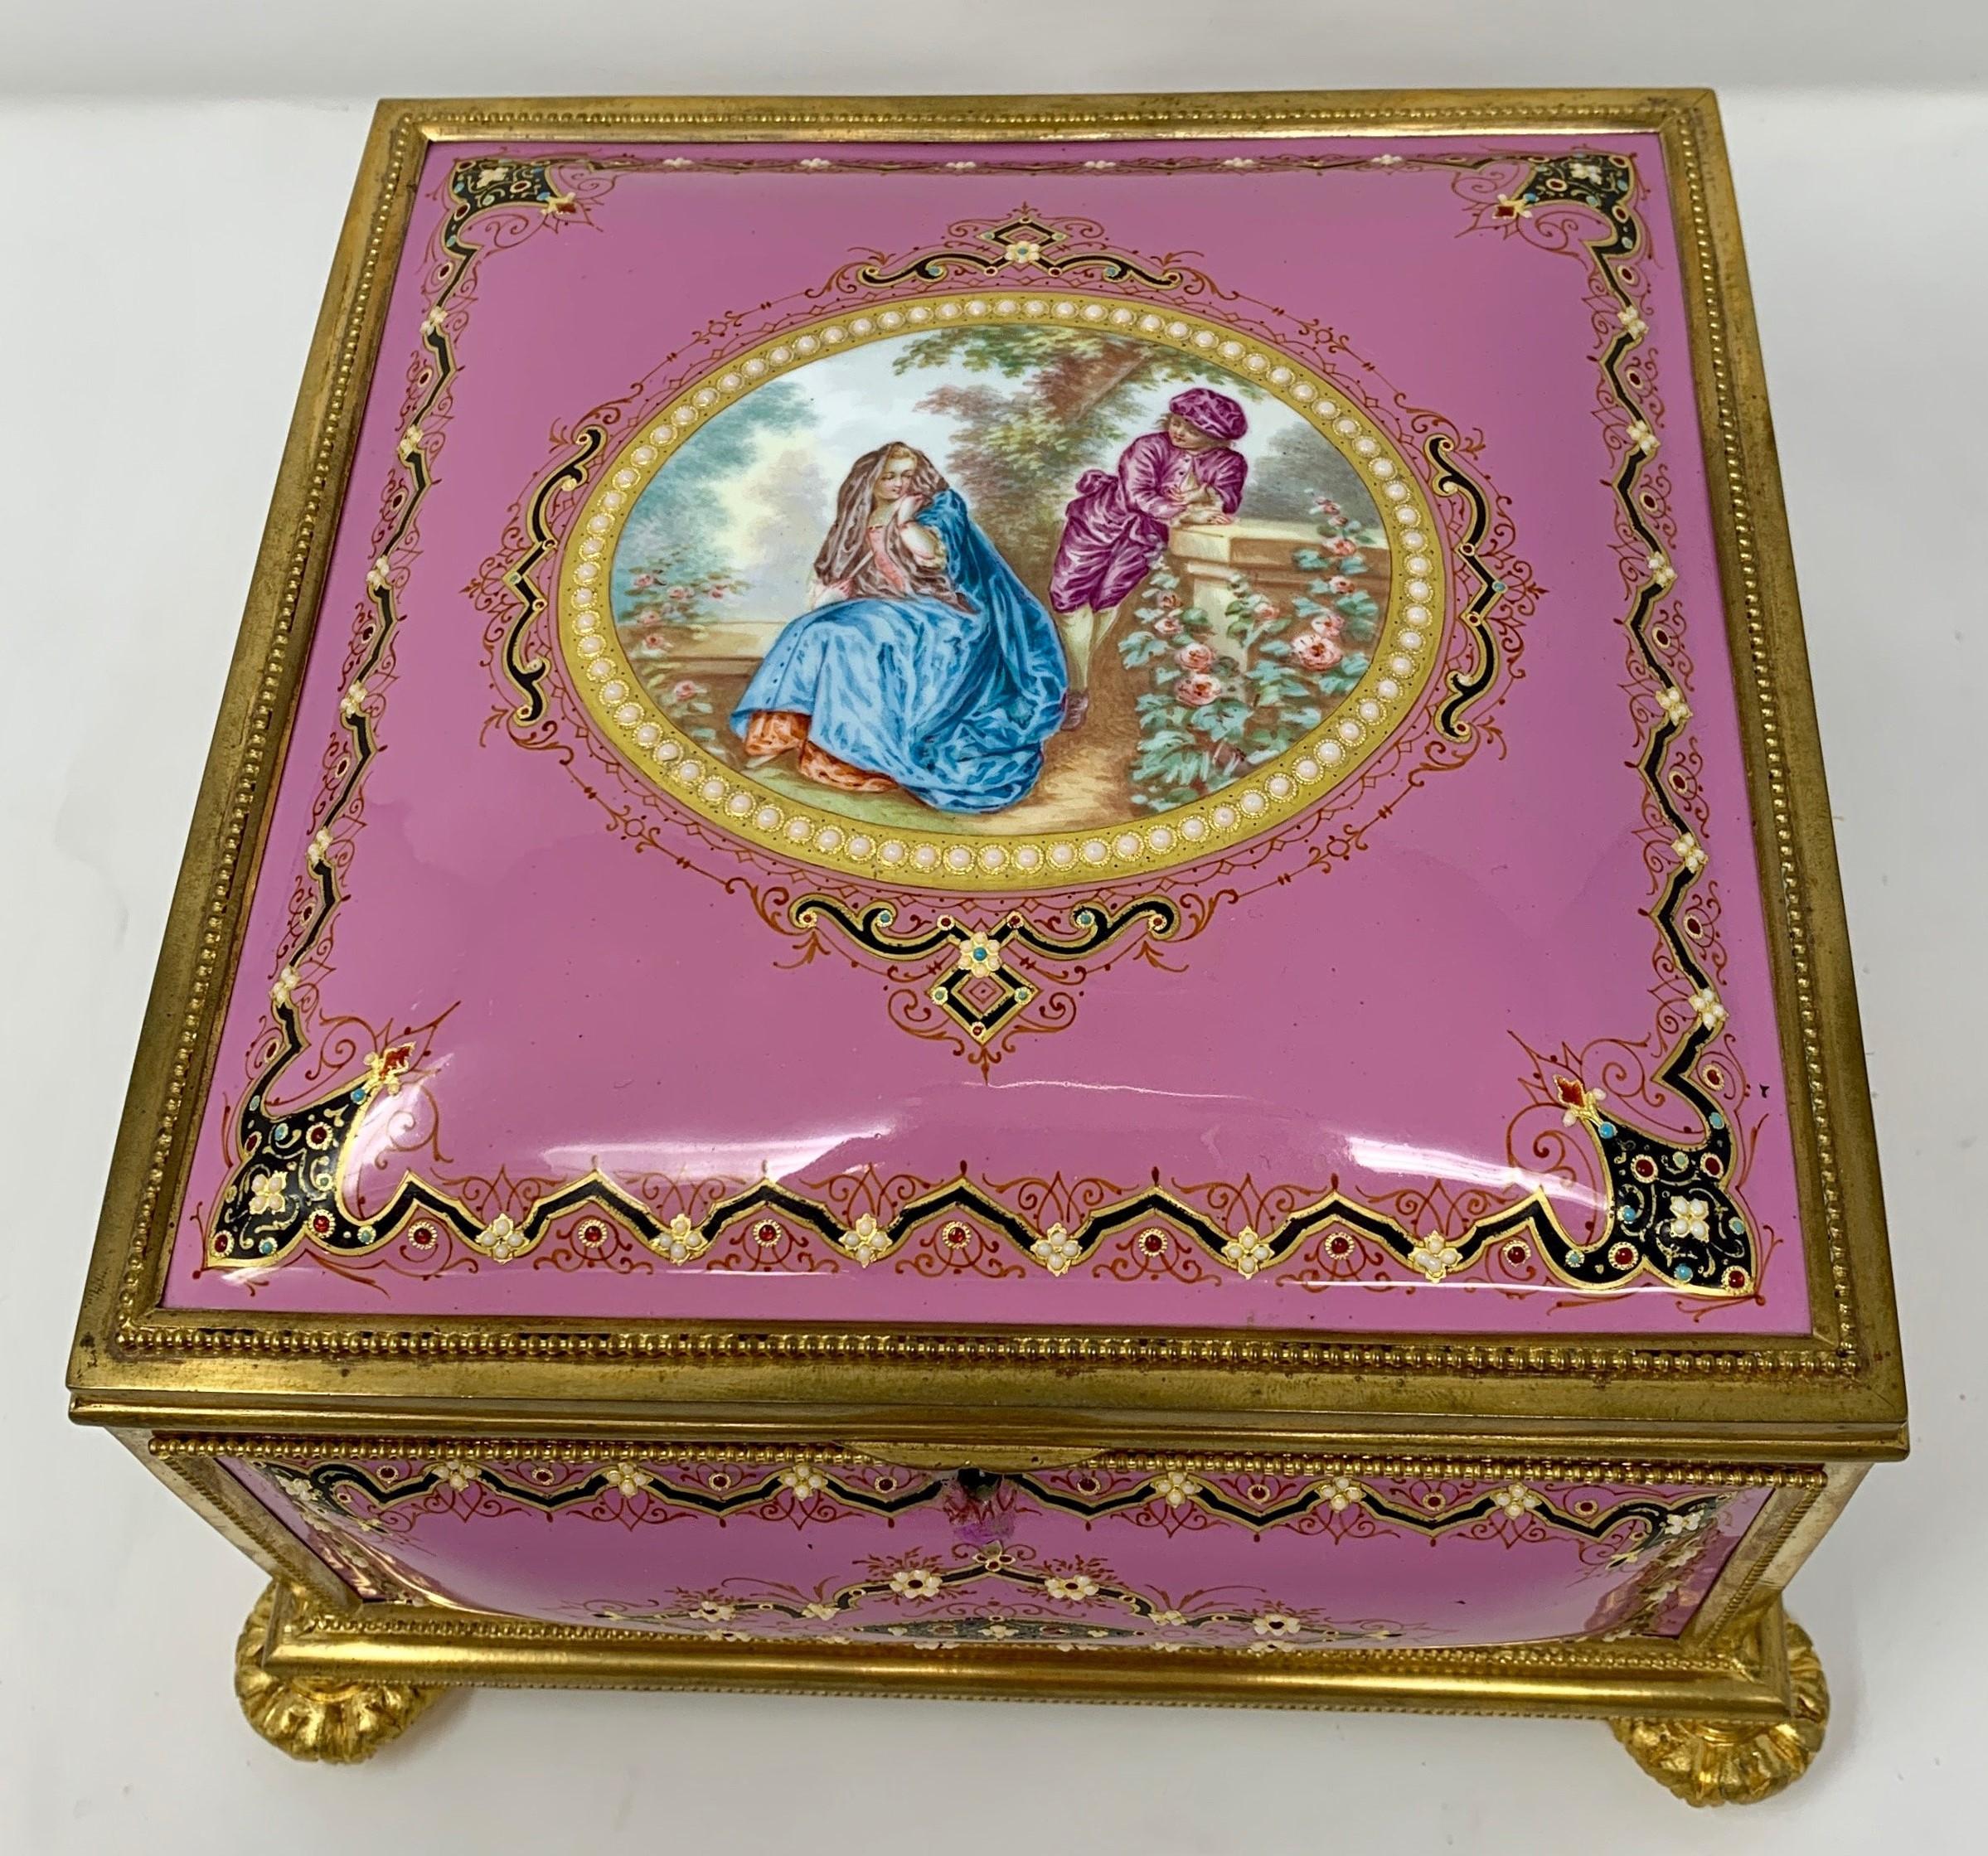 This is an extraordinary box. It is a perfect example of the fine process of enameling and ormolu fitting that took place in 19th century France.